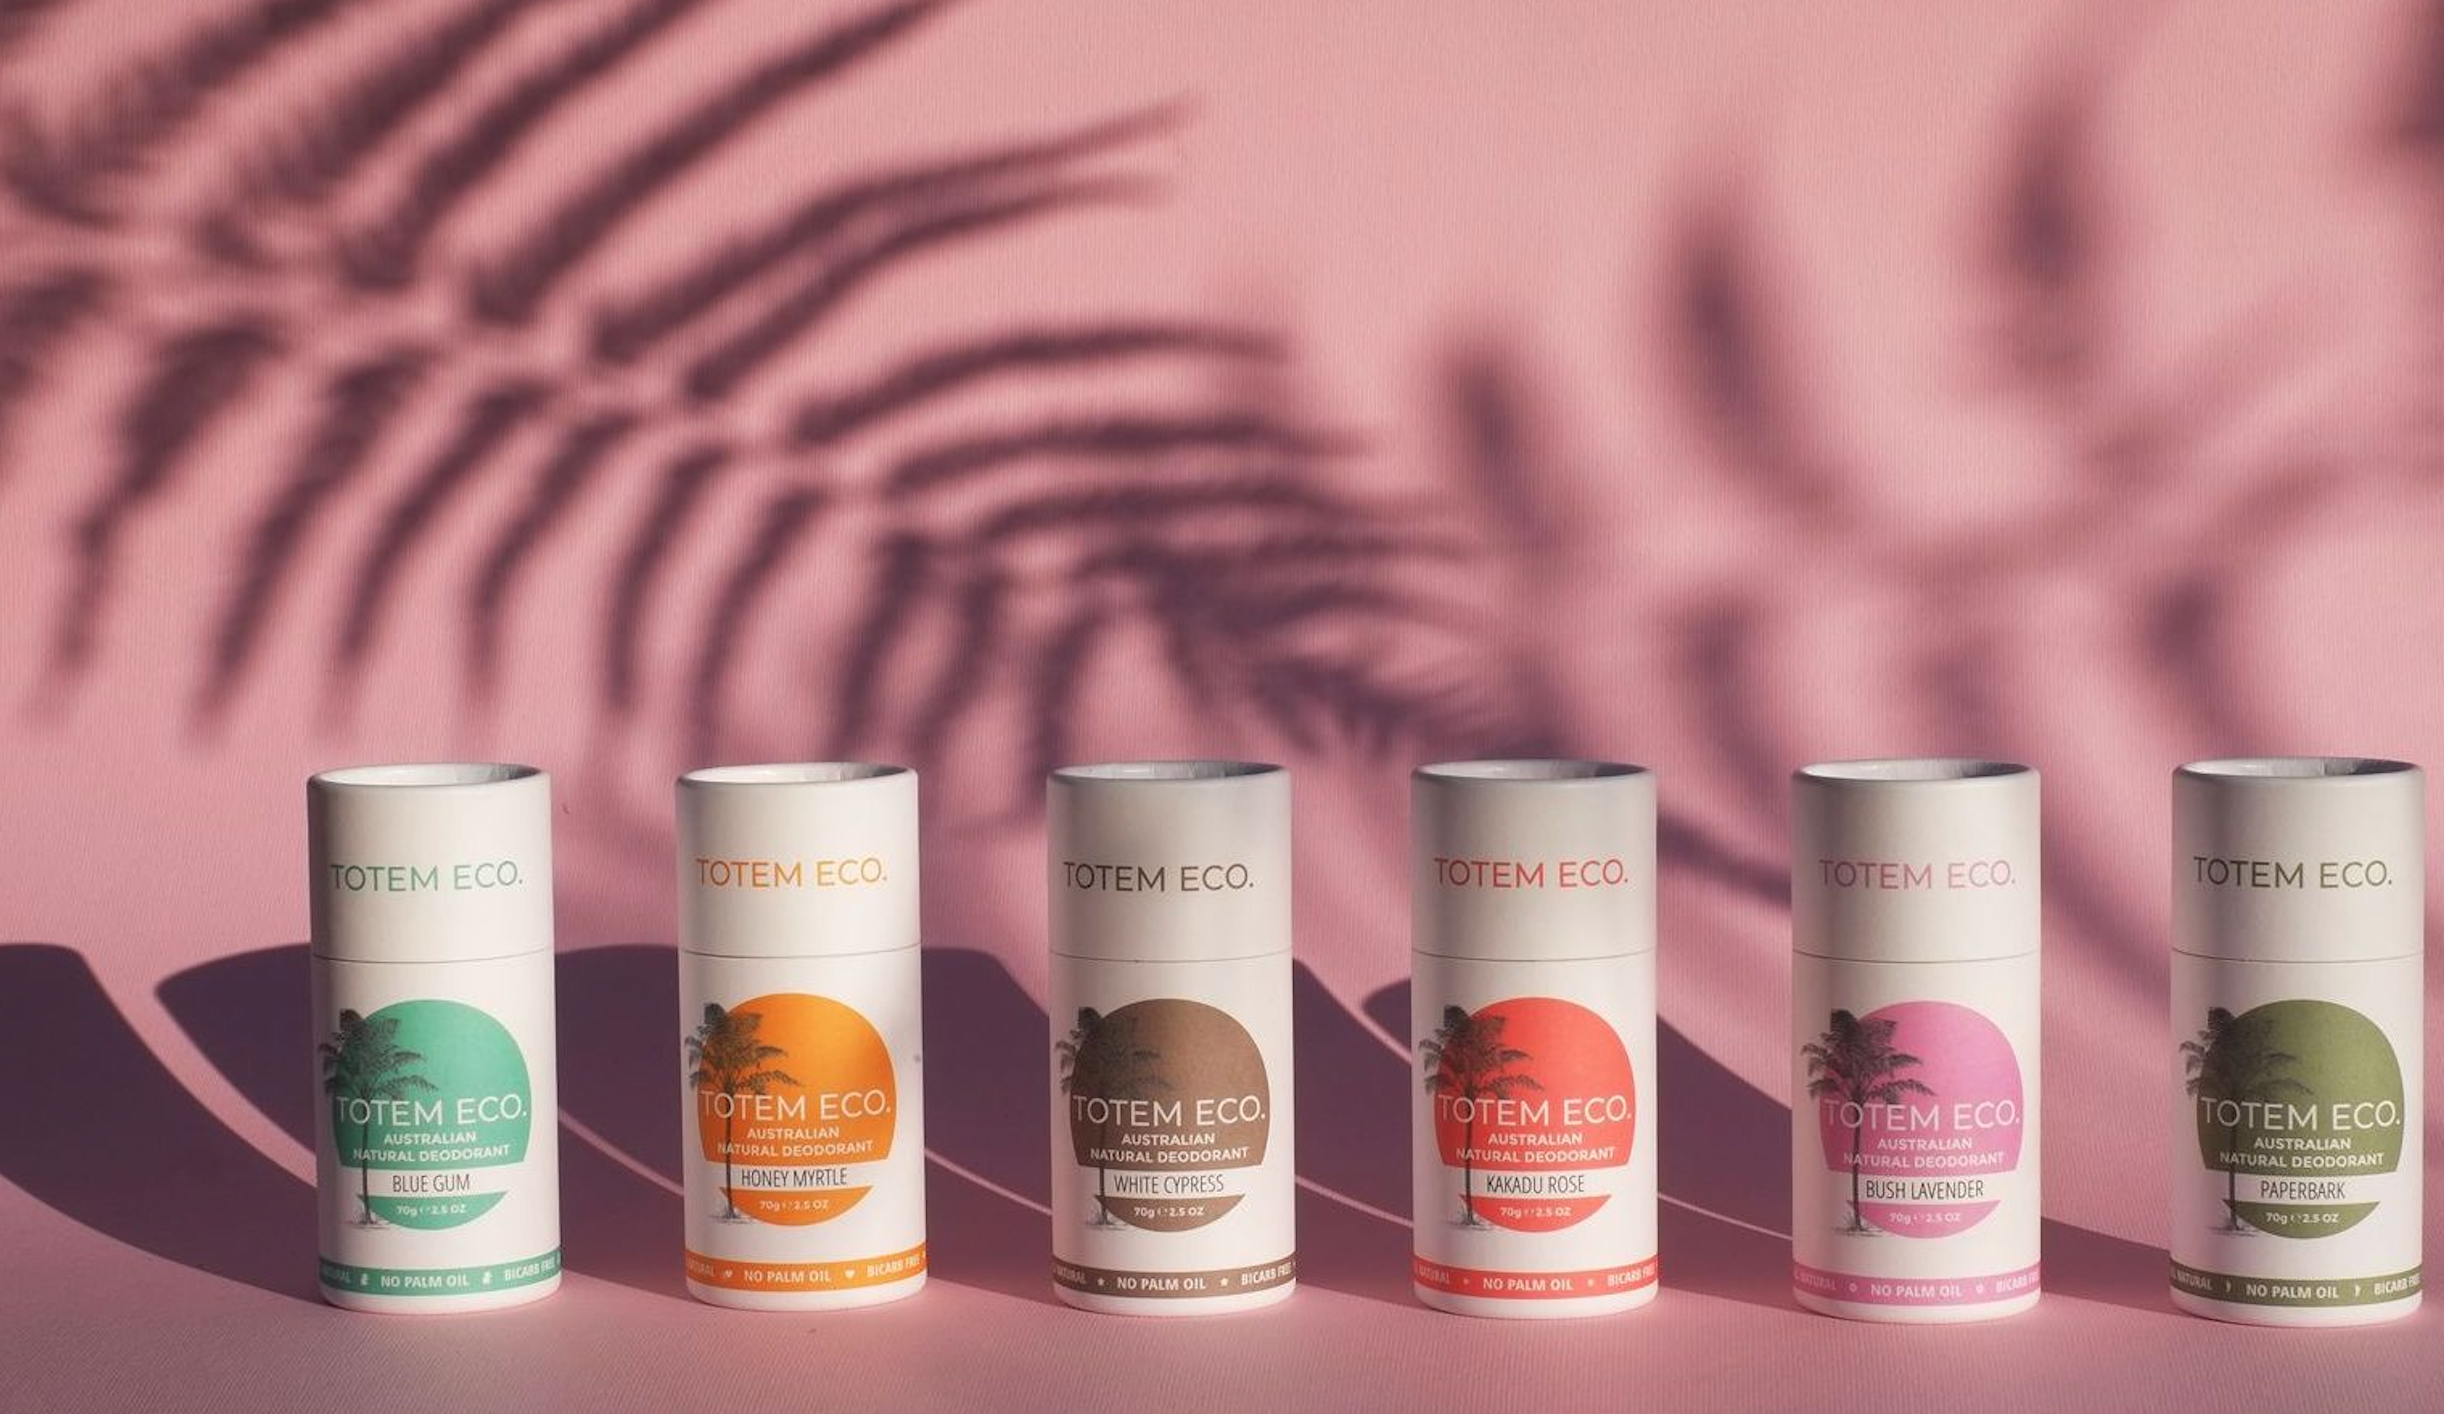 Totem Eco's new range of premium natural deodorant sticks are here and they're free of bicarb